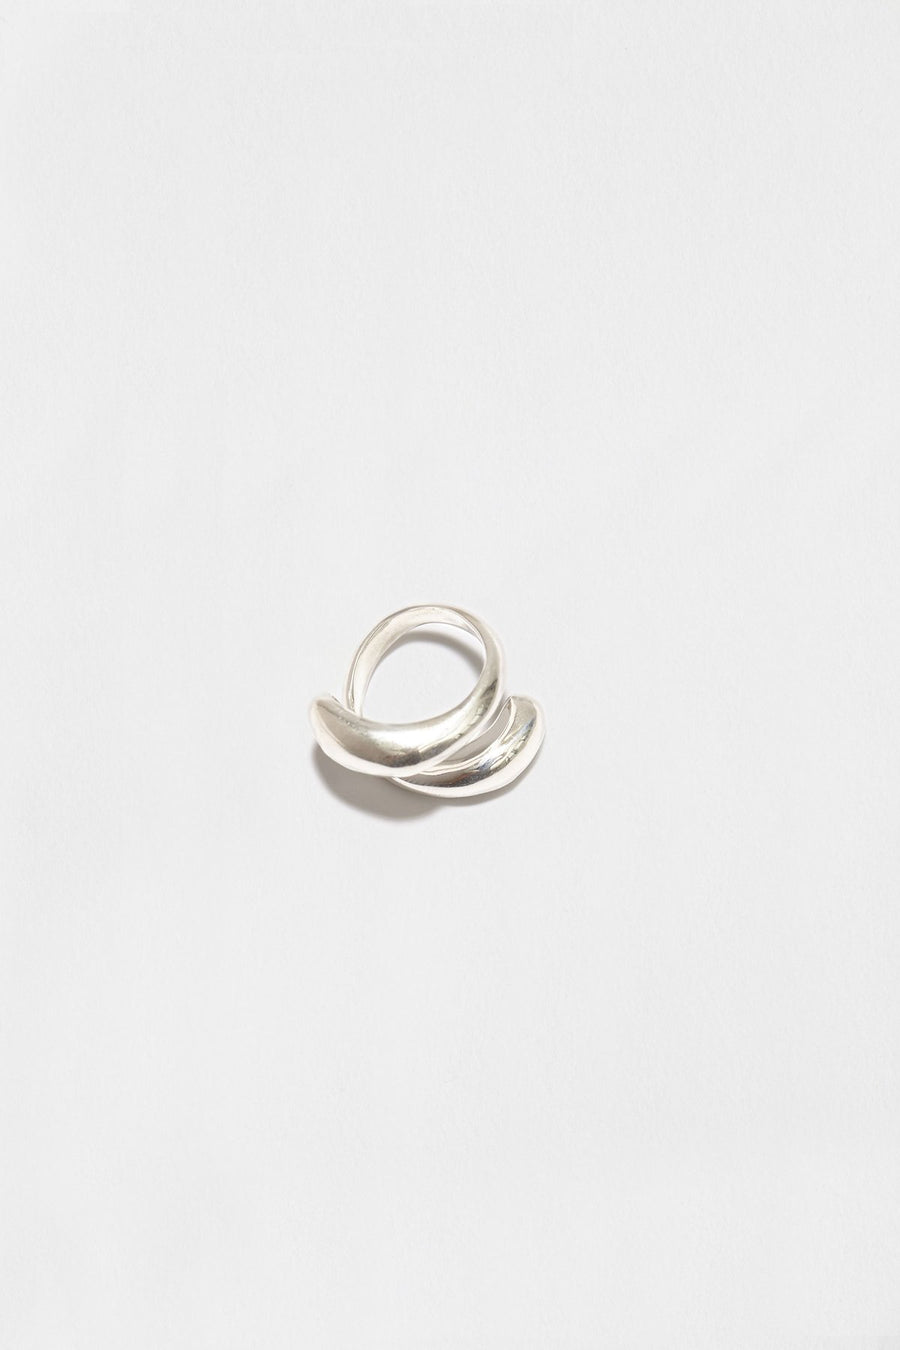 Abrazo Ring by Hernán Herdez | Jeryco Store